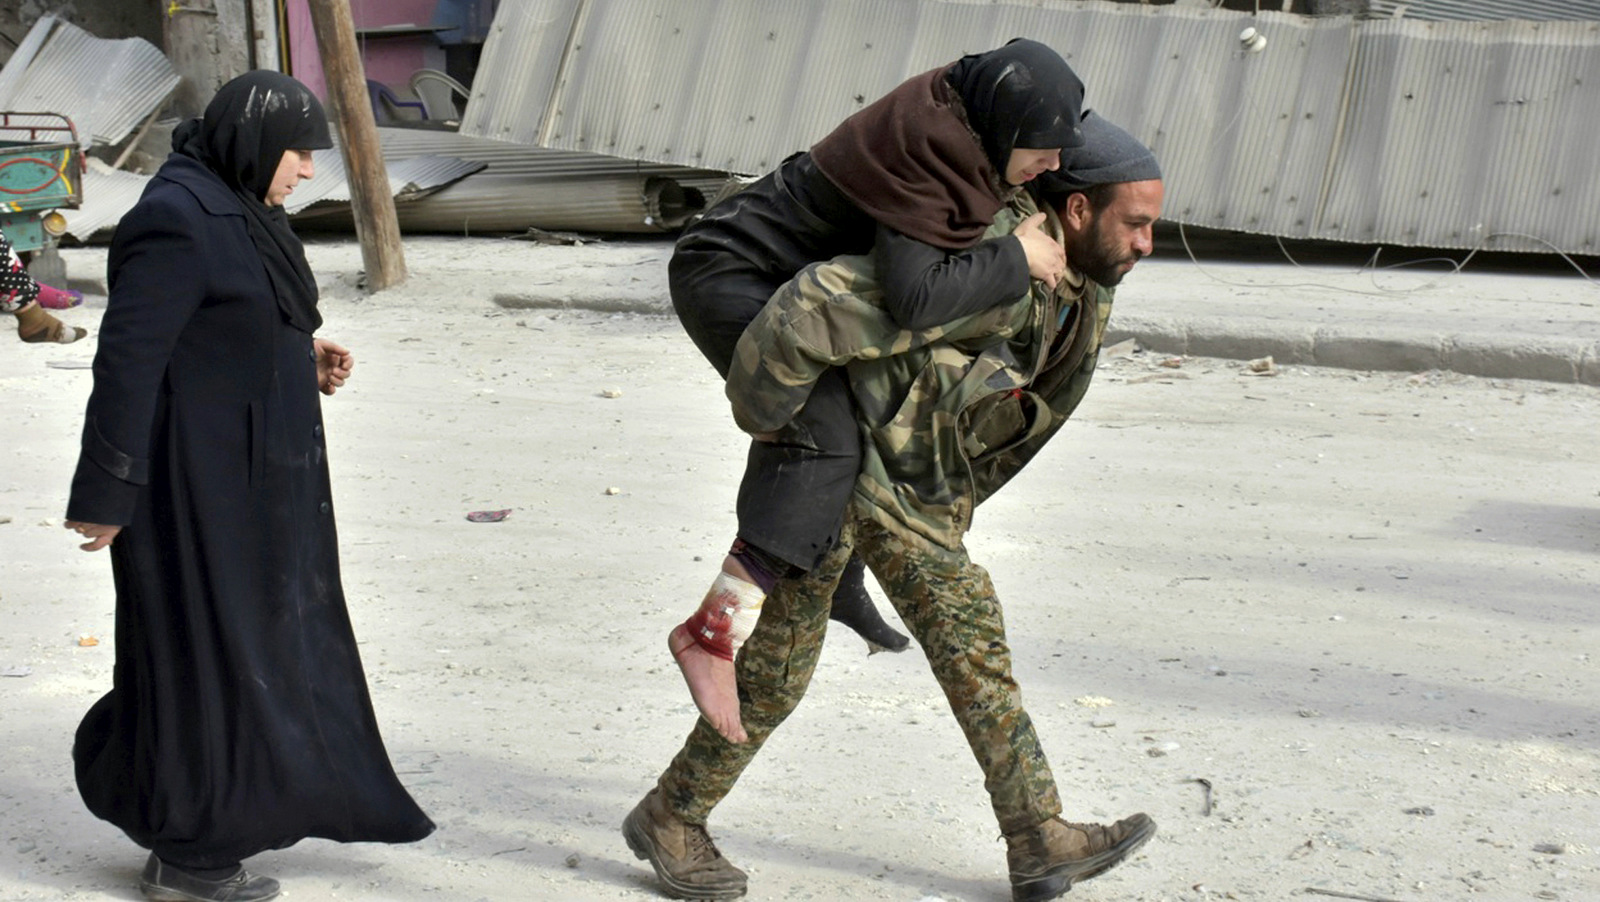 ASyrian soldier carries a wounded woman in eastern Aleppo, Syria, Monday, Dec. 12, 2016. Syria's military said Monday it has regained control of 98 percent of eastern Aleppo, as government forces close in the last remaining sliver of a rebel enclave packed with fighters as well as tens of thousands of civilians. (SANA via AP)